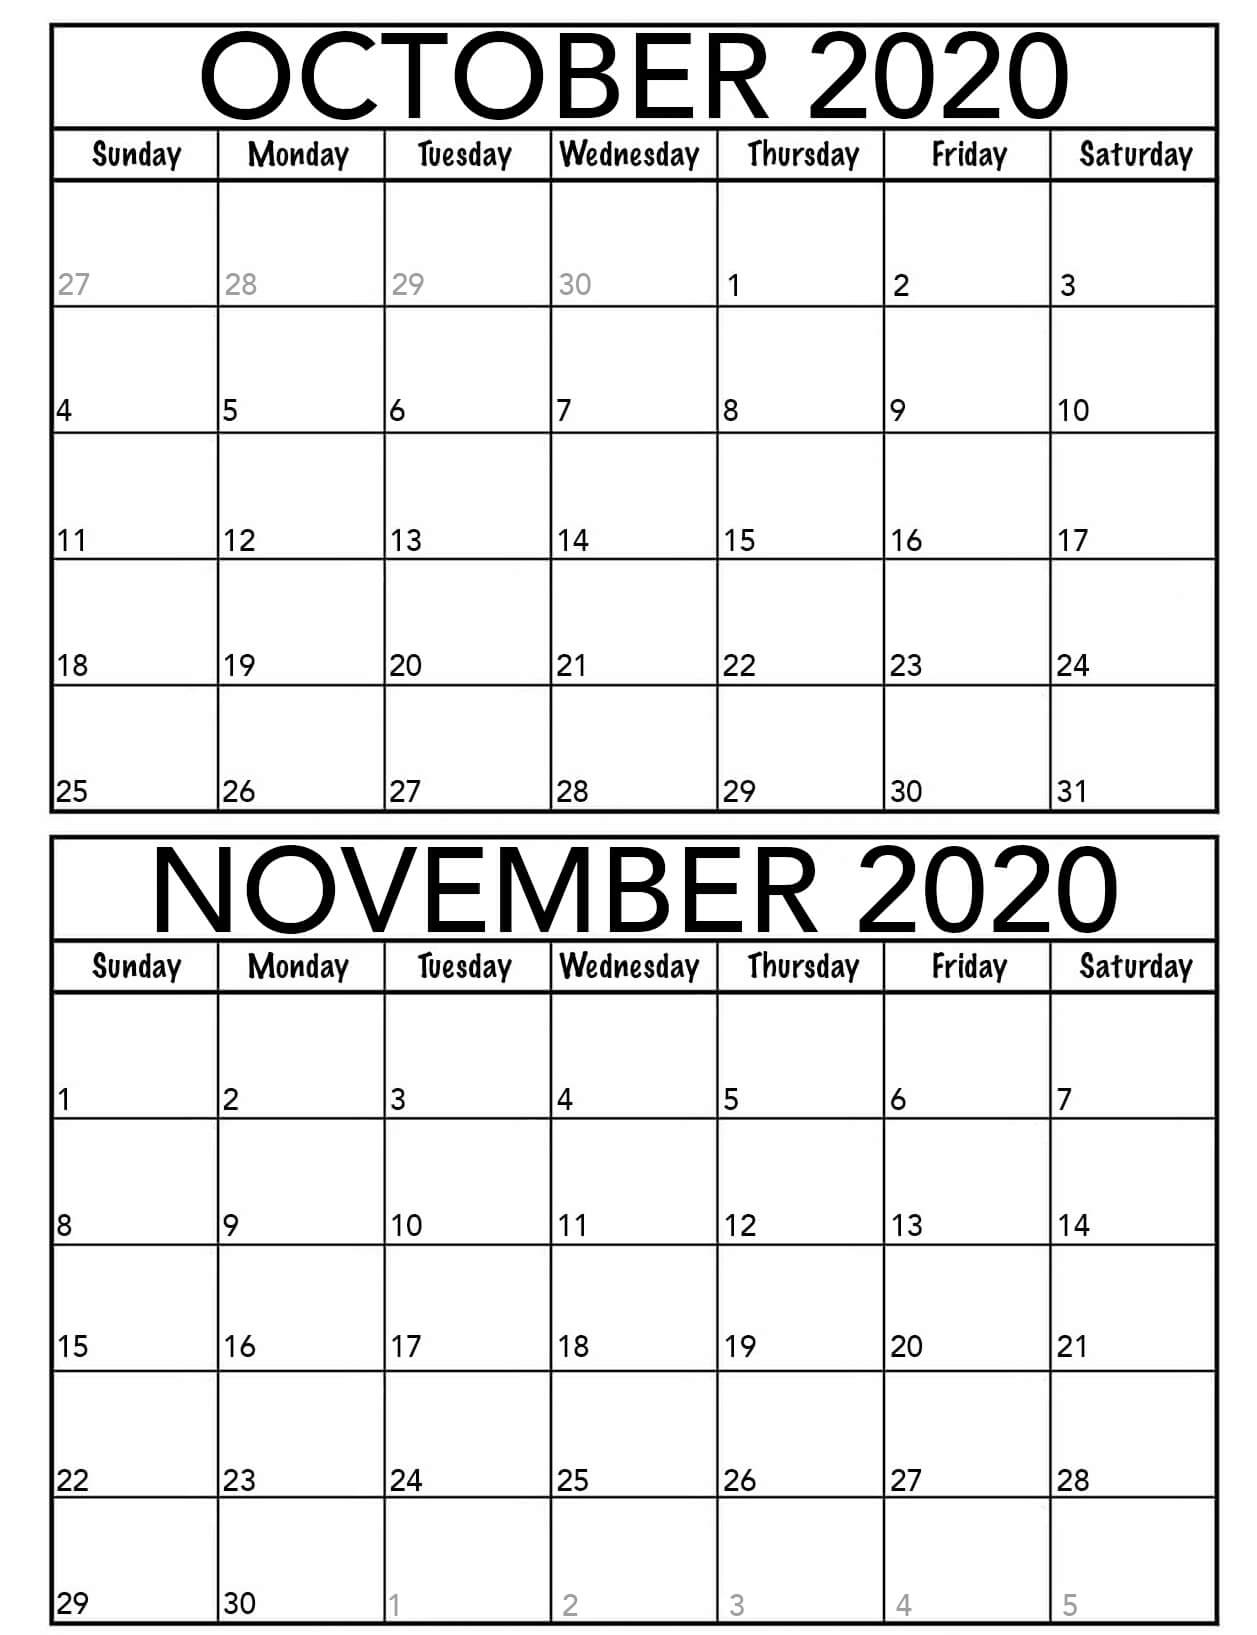 October 2020 To March 2021 Calendar Online | Free Printable Calendar Shop November 2020 - March 2021 Calendar